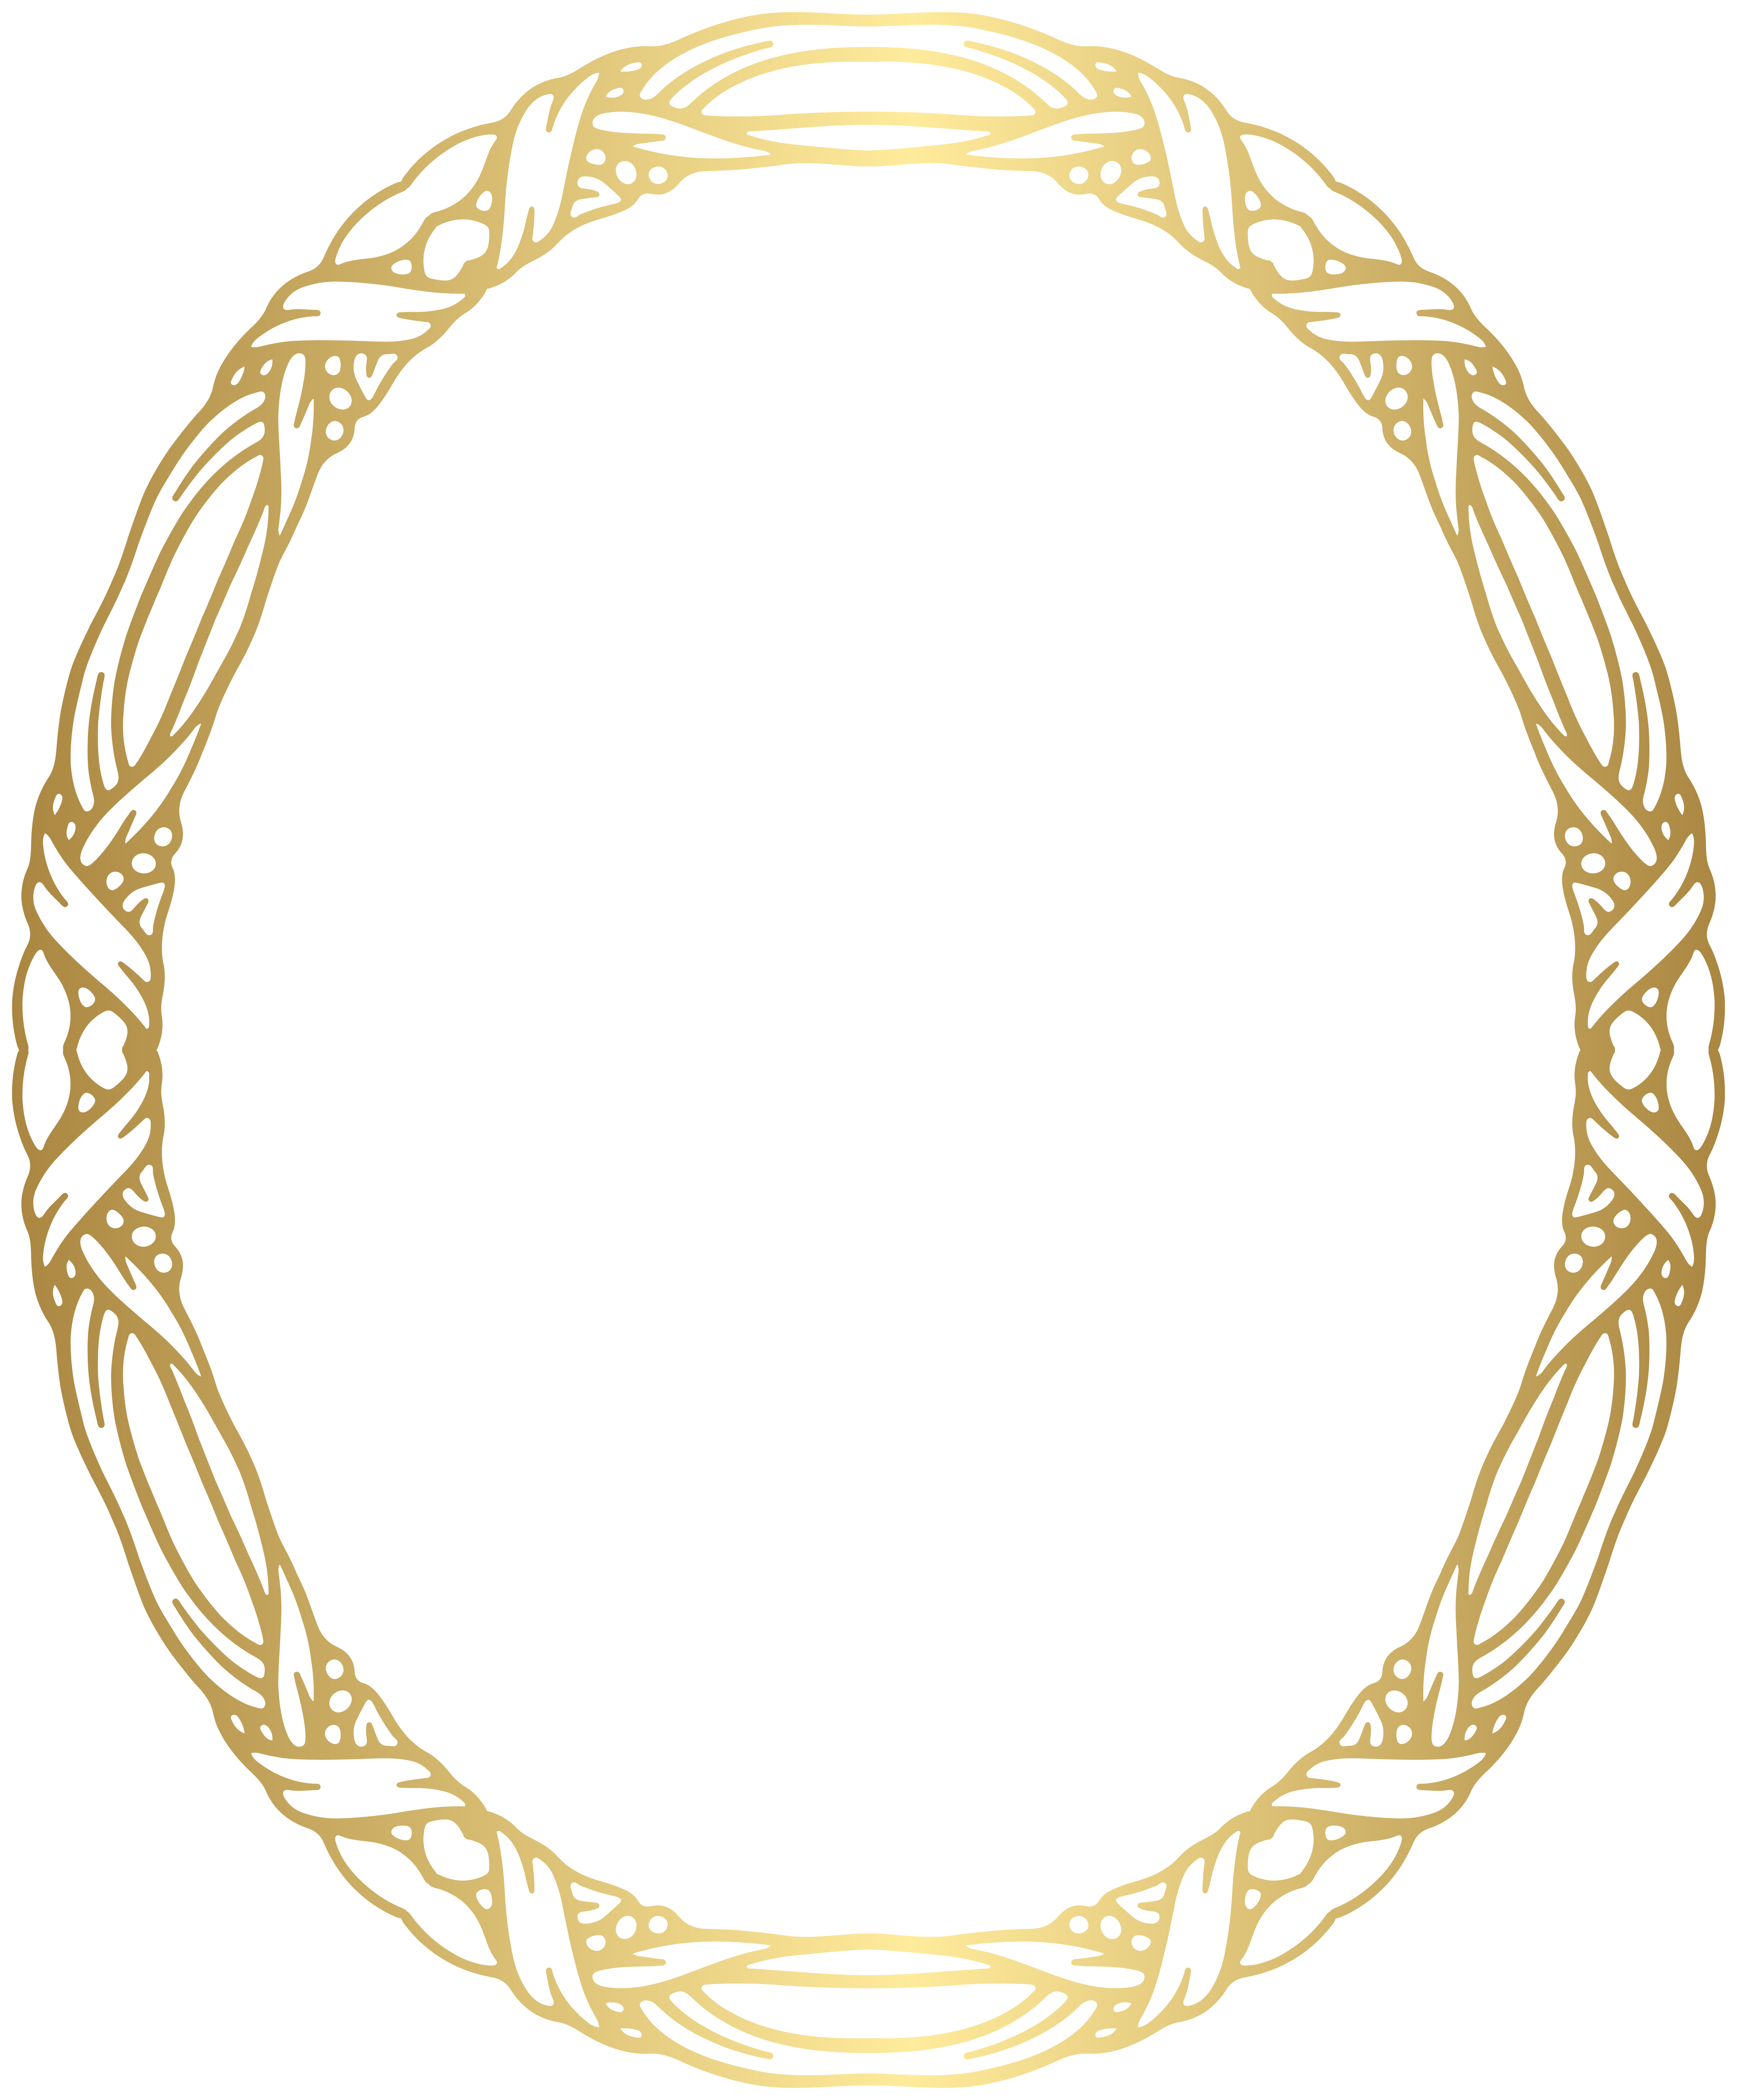 free clipart oval frame